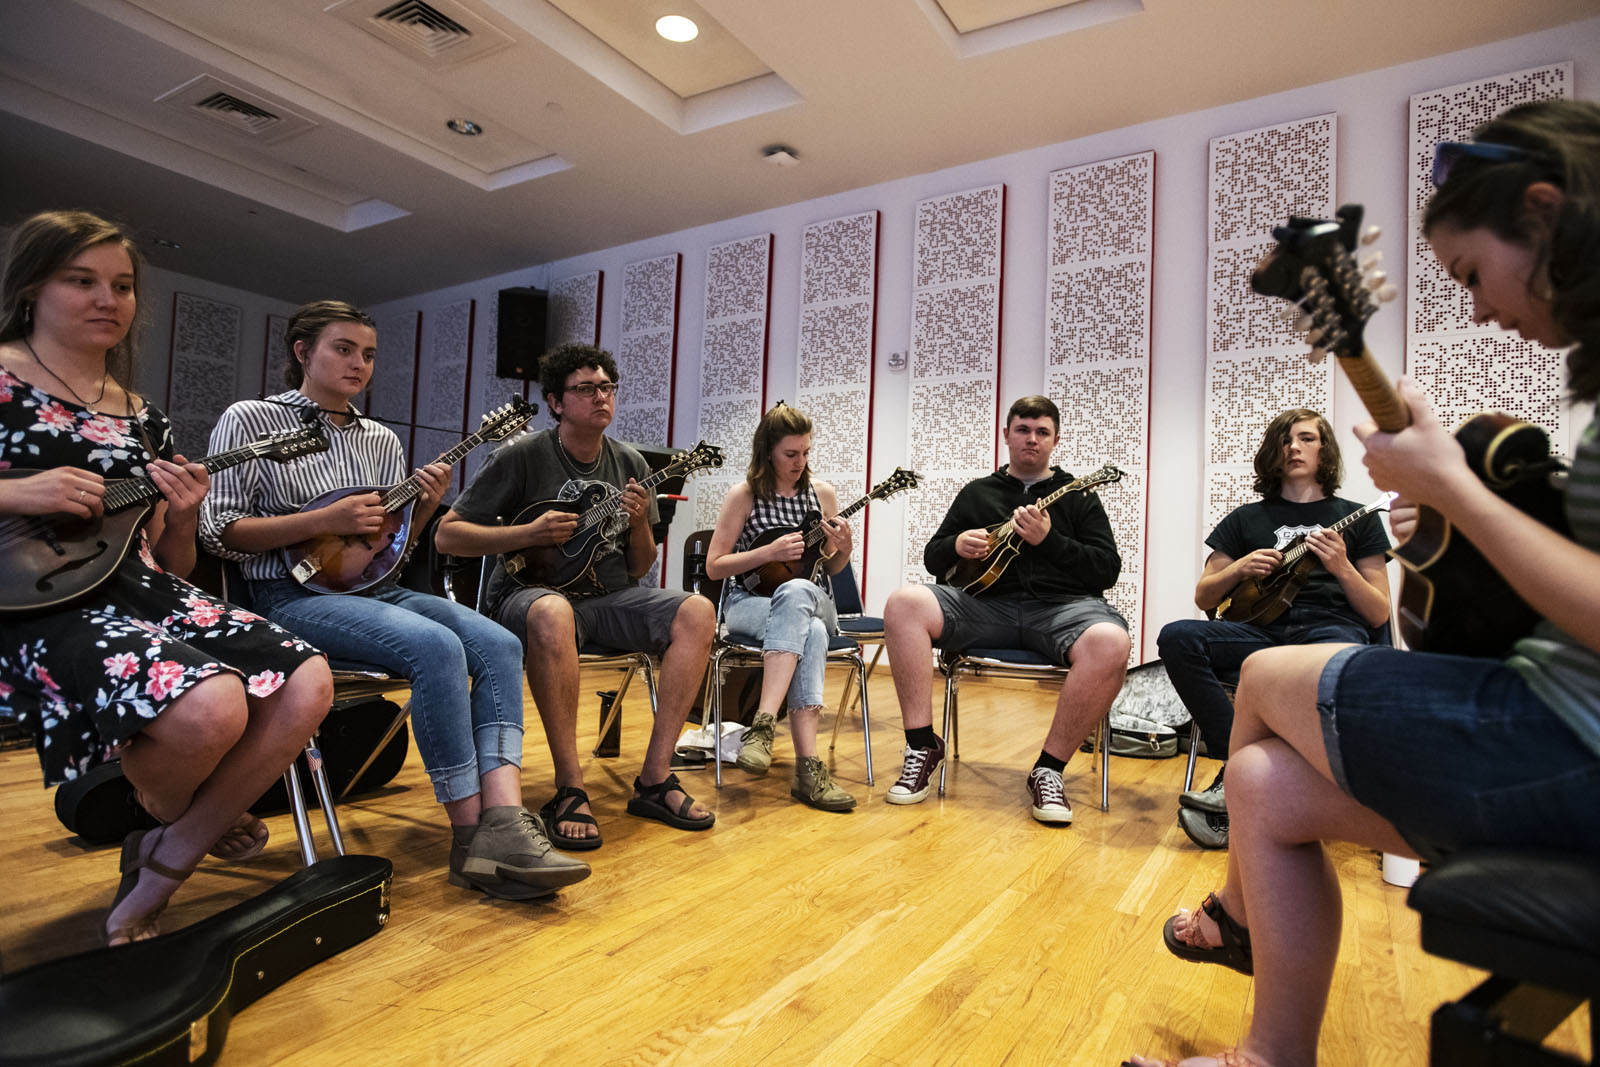 Instructor and bluegrass luminary Sierra Hull, right, leads the mandolin class through a tune during the Bluegrass Workshop in Packard Hall on June 26, 2018.